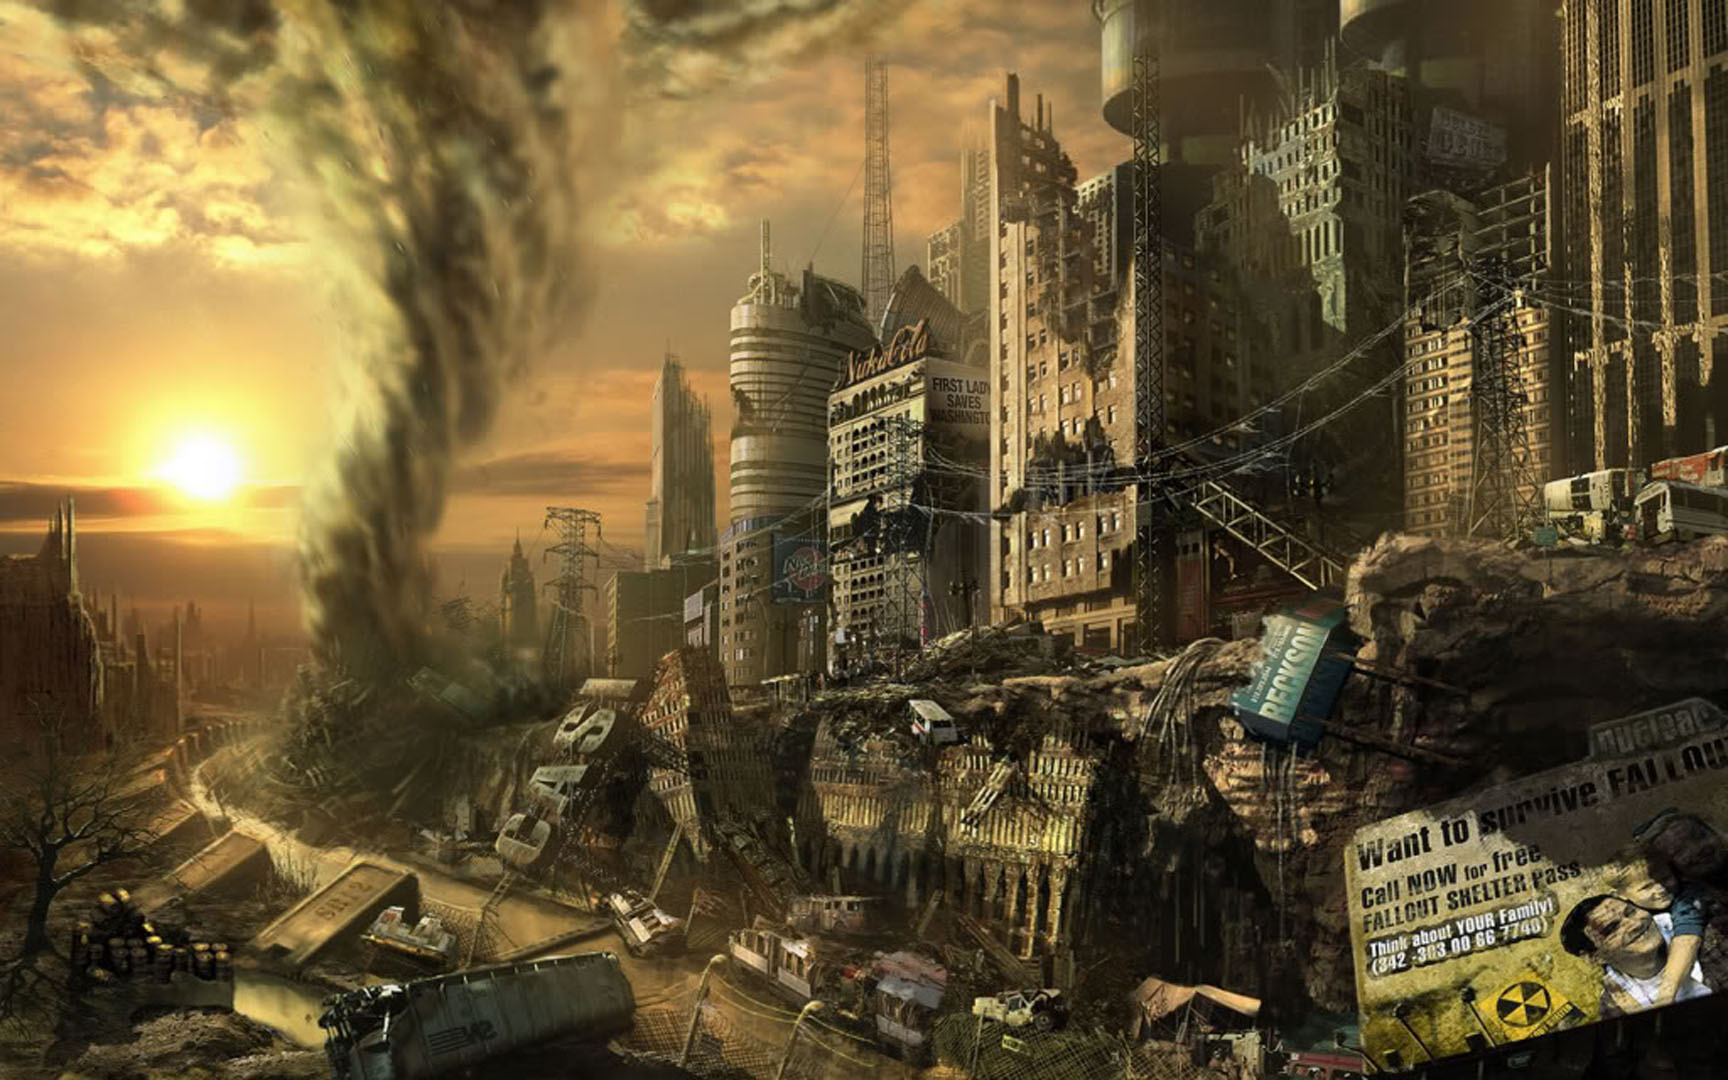 Devastated City Action Rpg Games Wallpaper Image Featuring Fallout